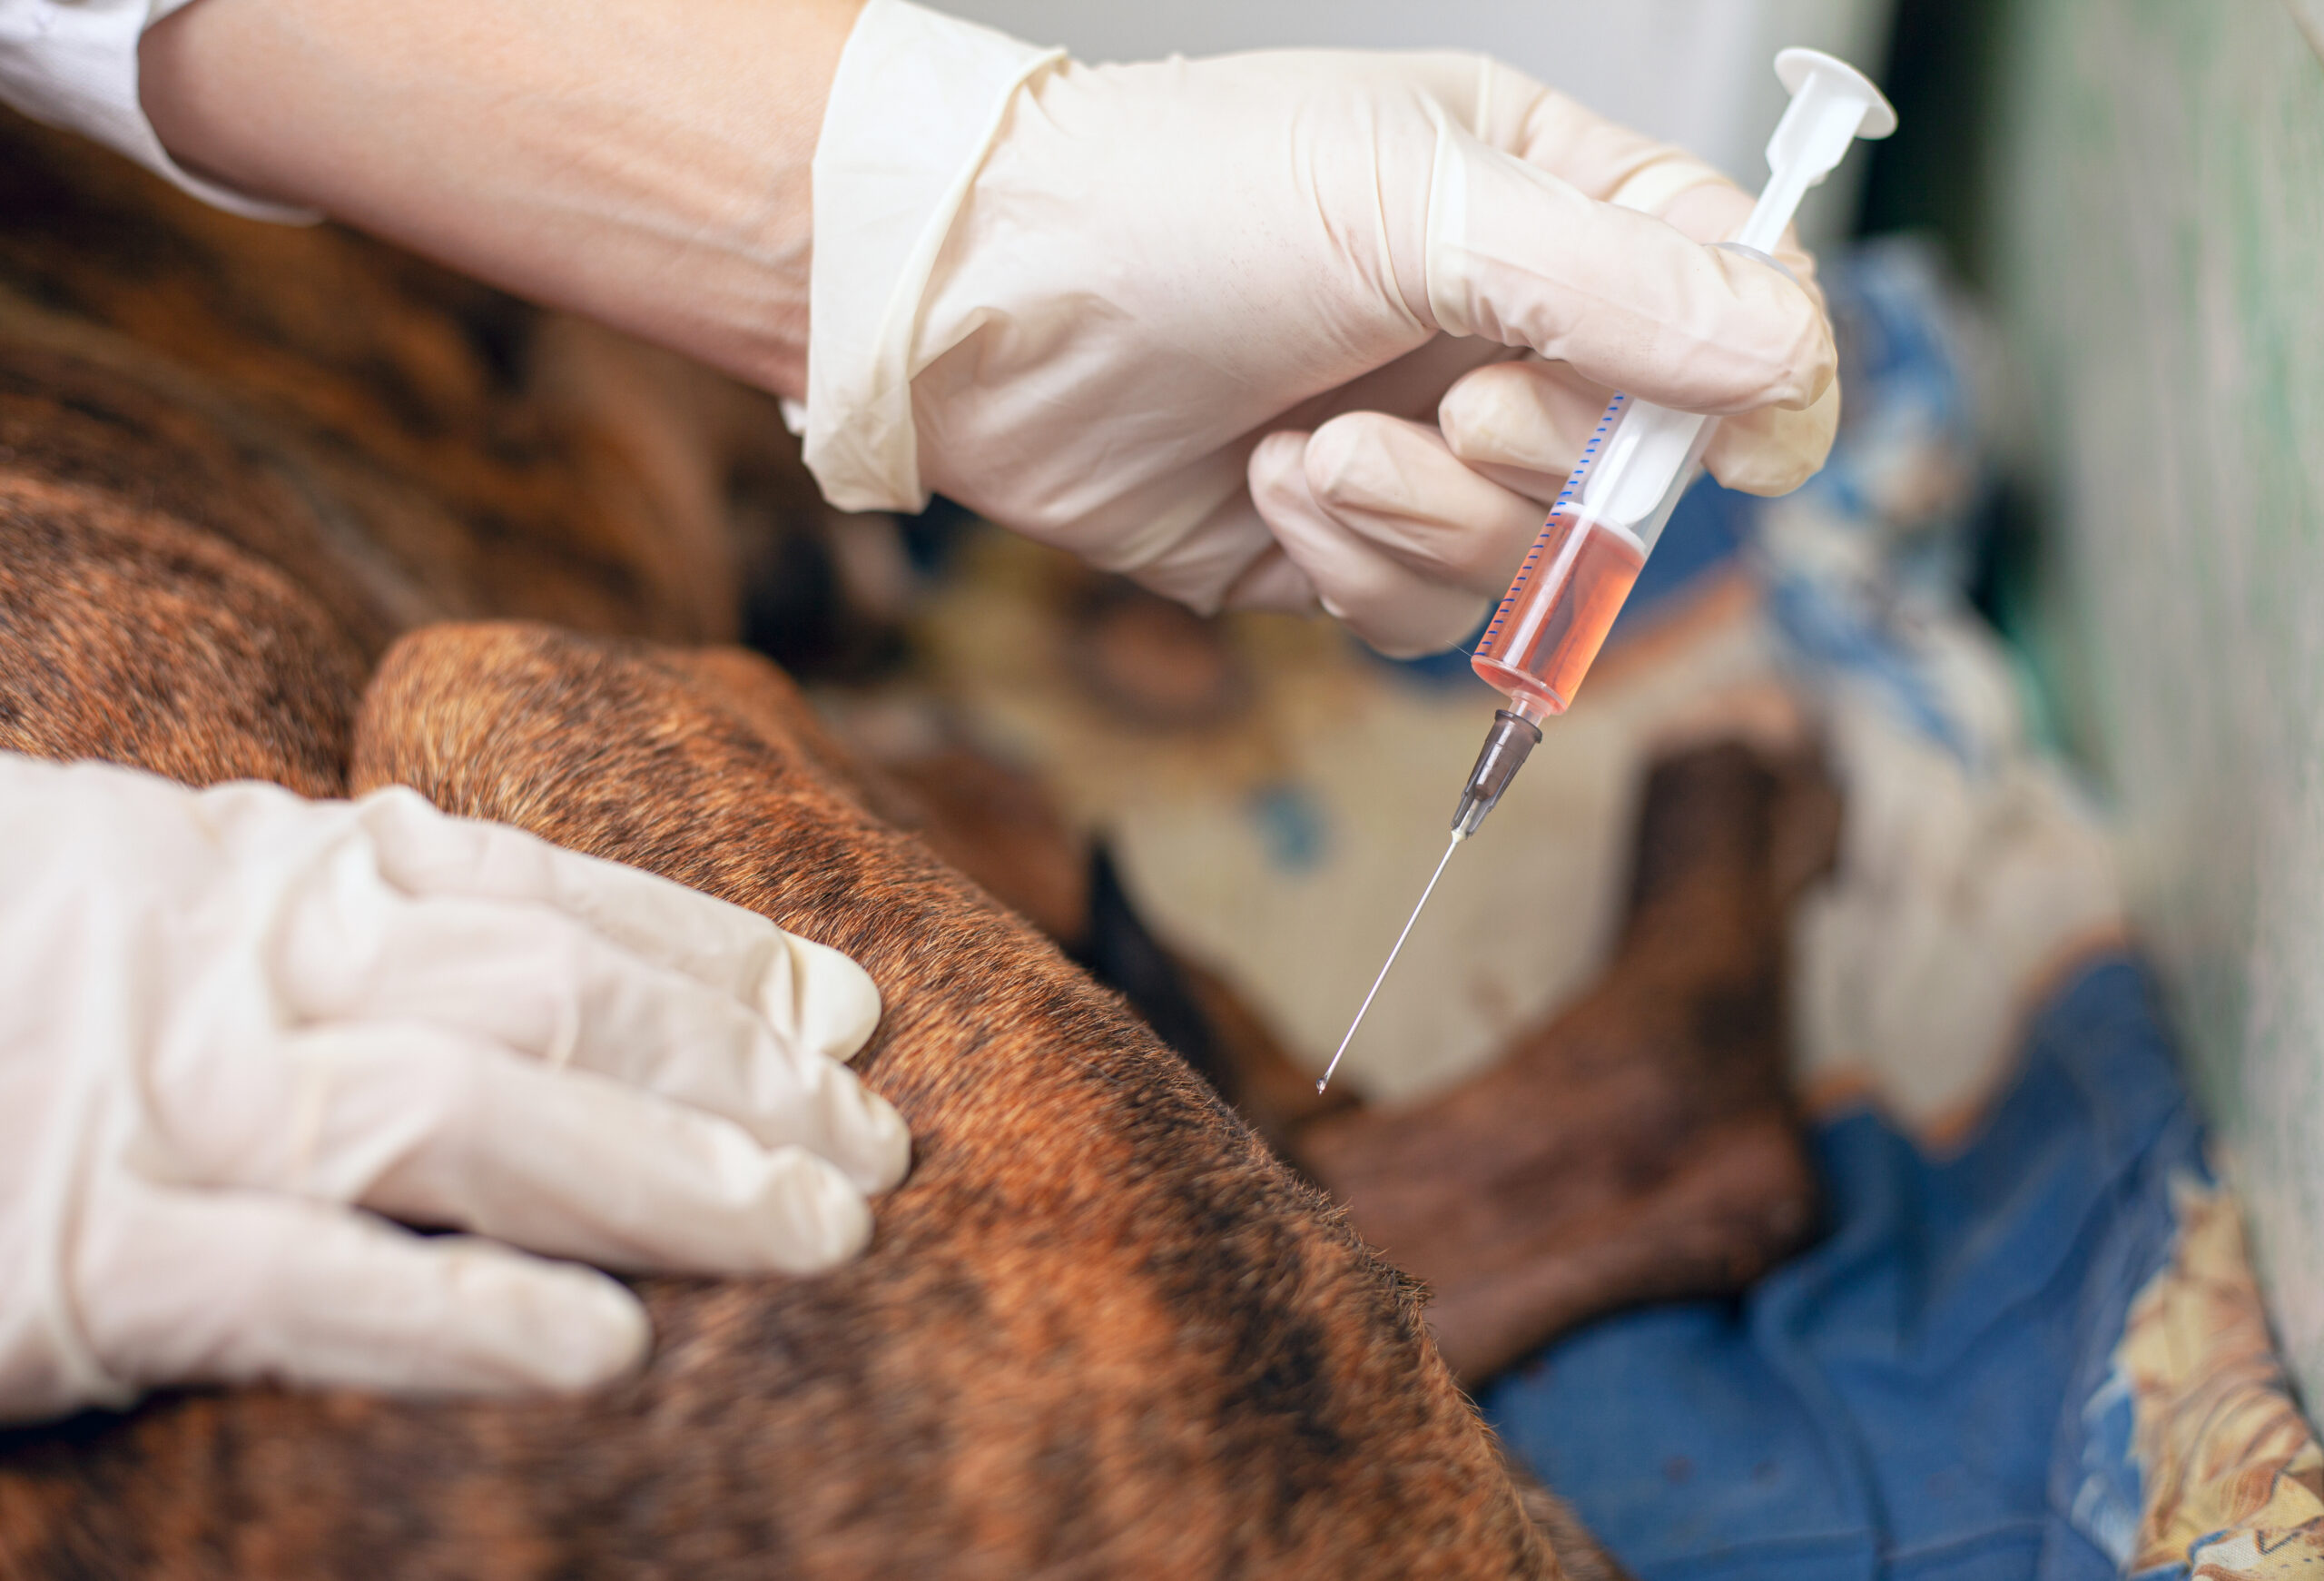 vet gives an injection to a sick dog. doctor holding a syringe with medicine. veterinary ambulance. treatment vaccination animal close-up